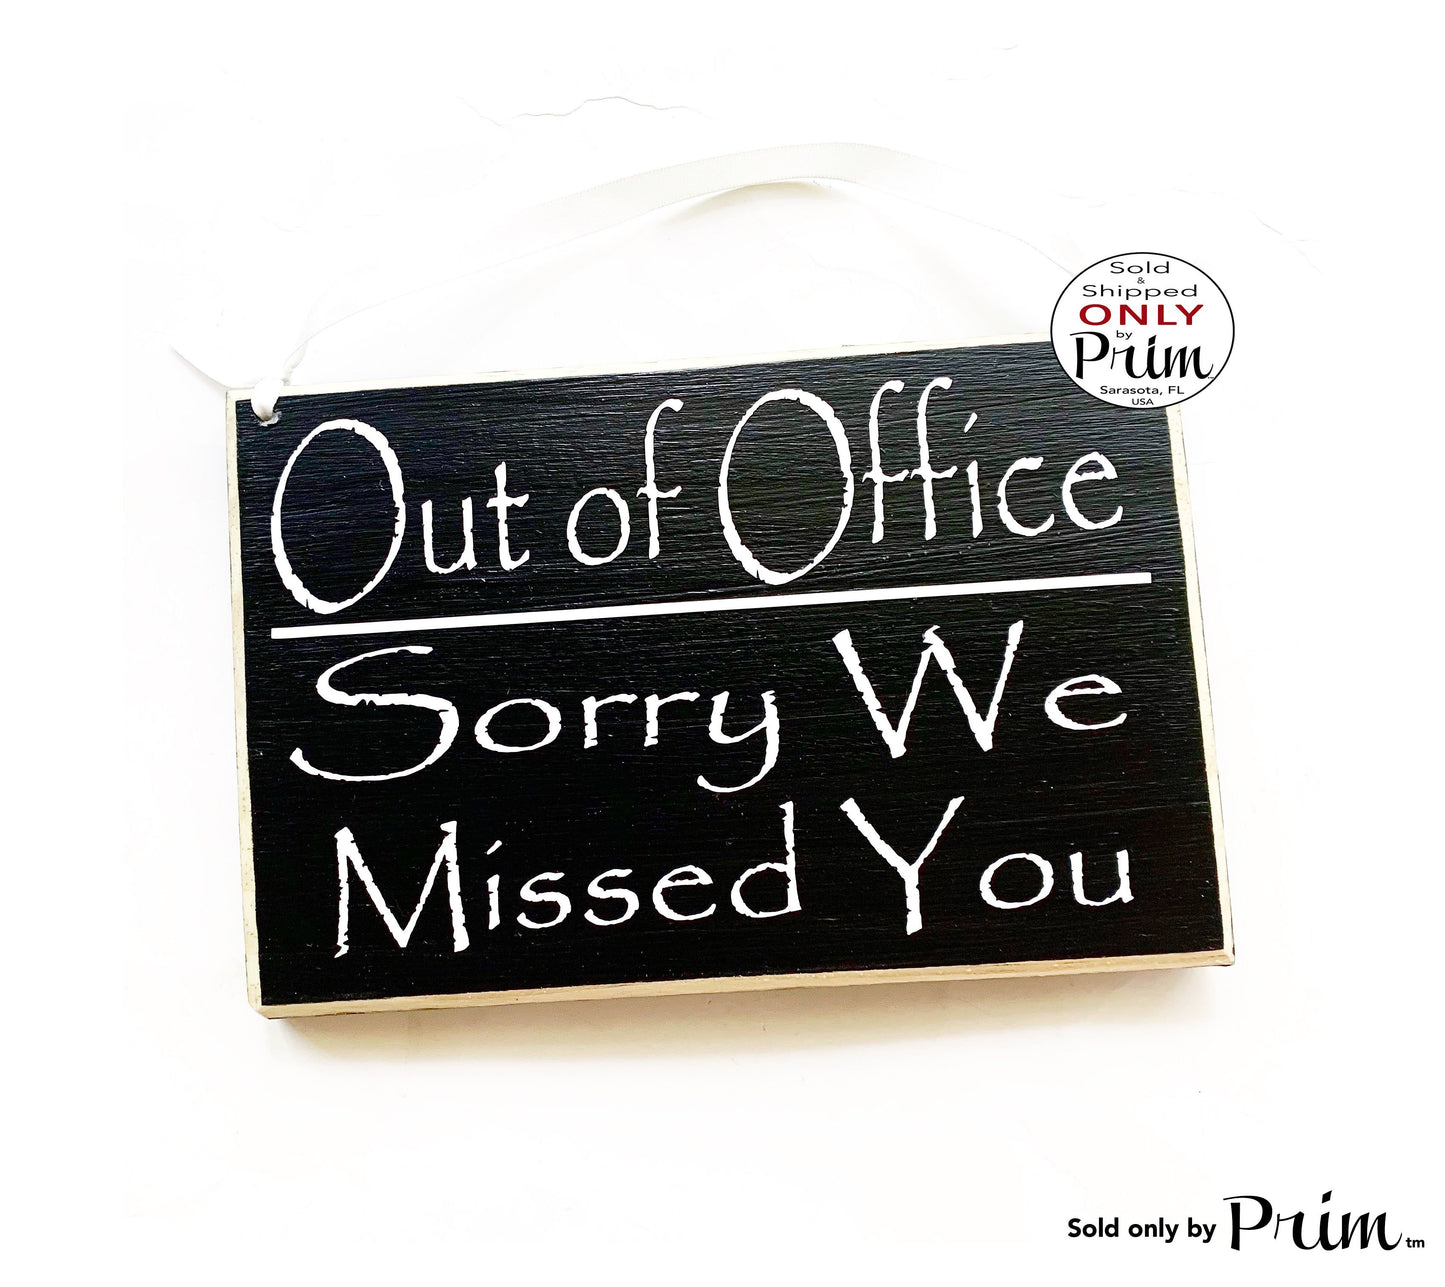 8x6 Out of the Office Sorry We Missed You Custom Wood Sign Spa Salon Office Business Out for Lunch Break Open Closed Be With You Shortly 